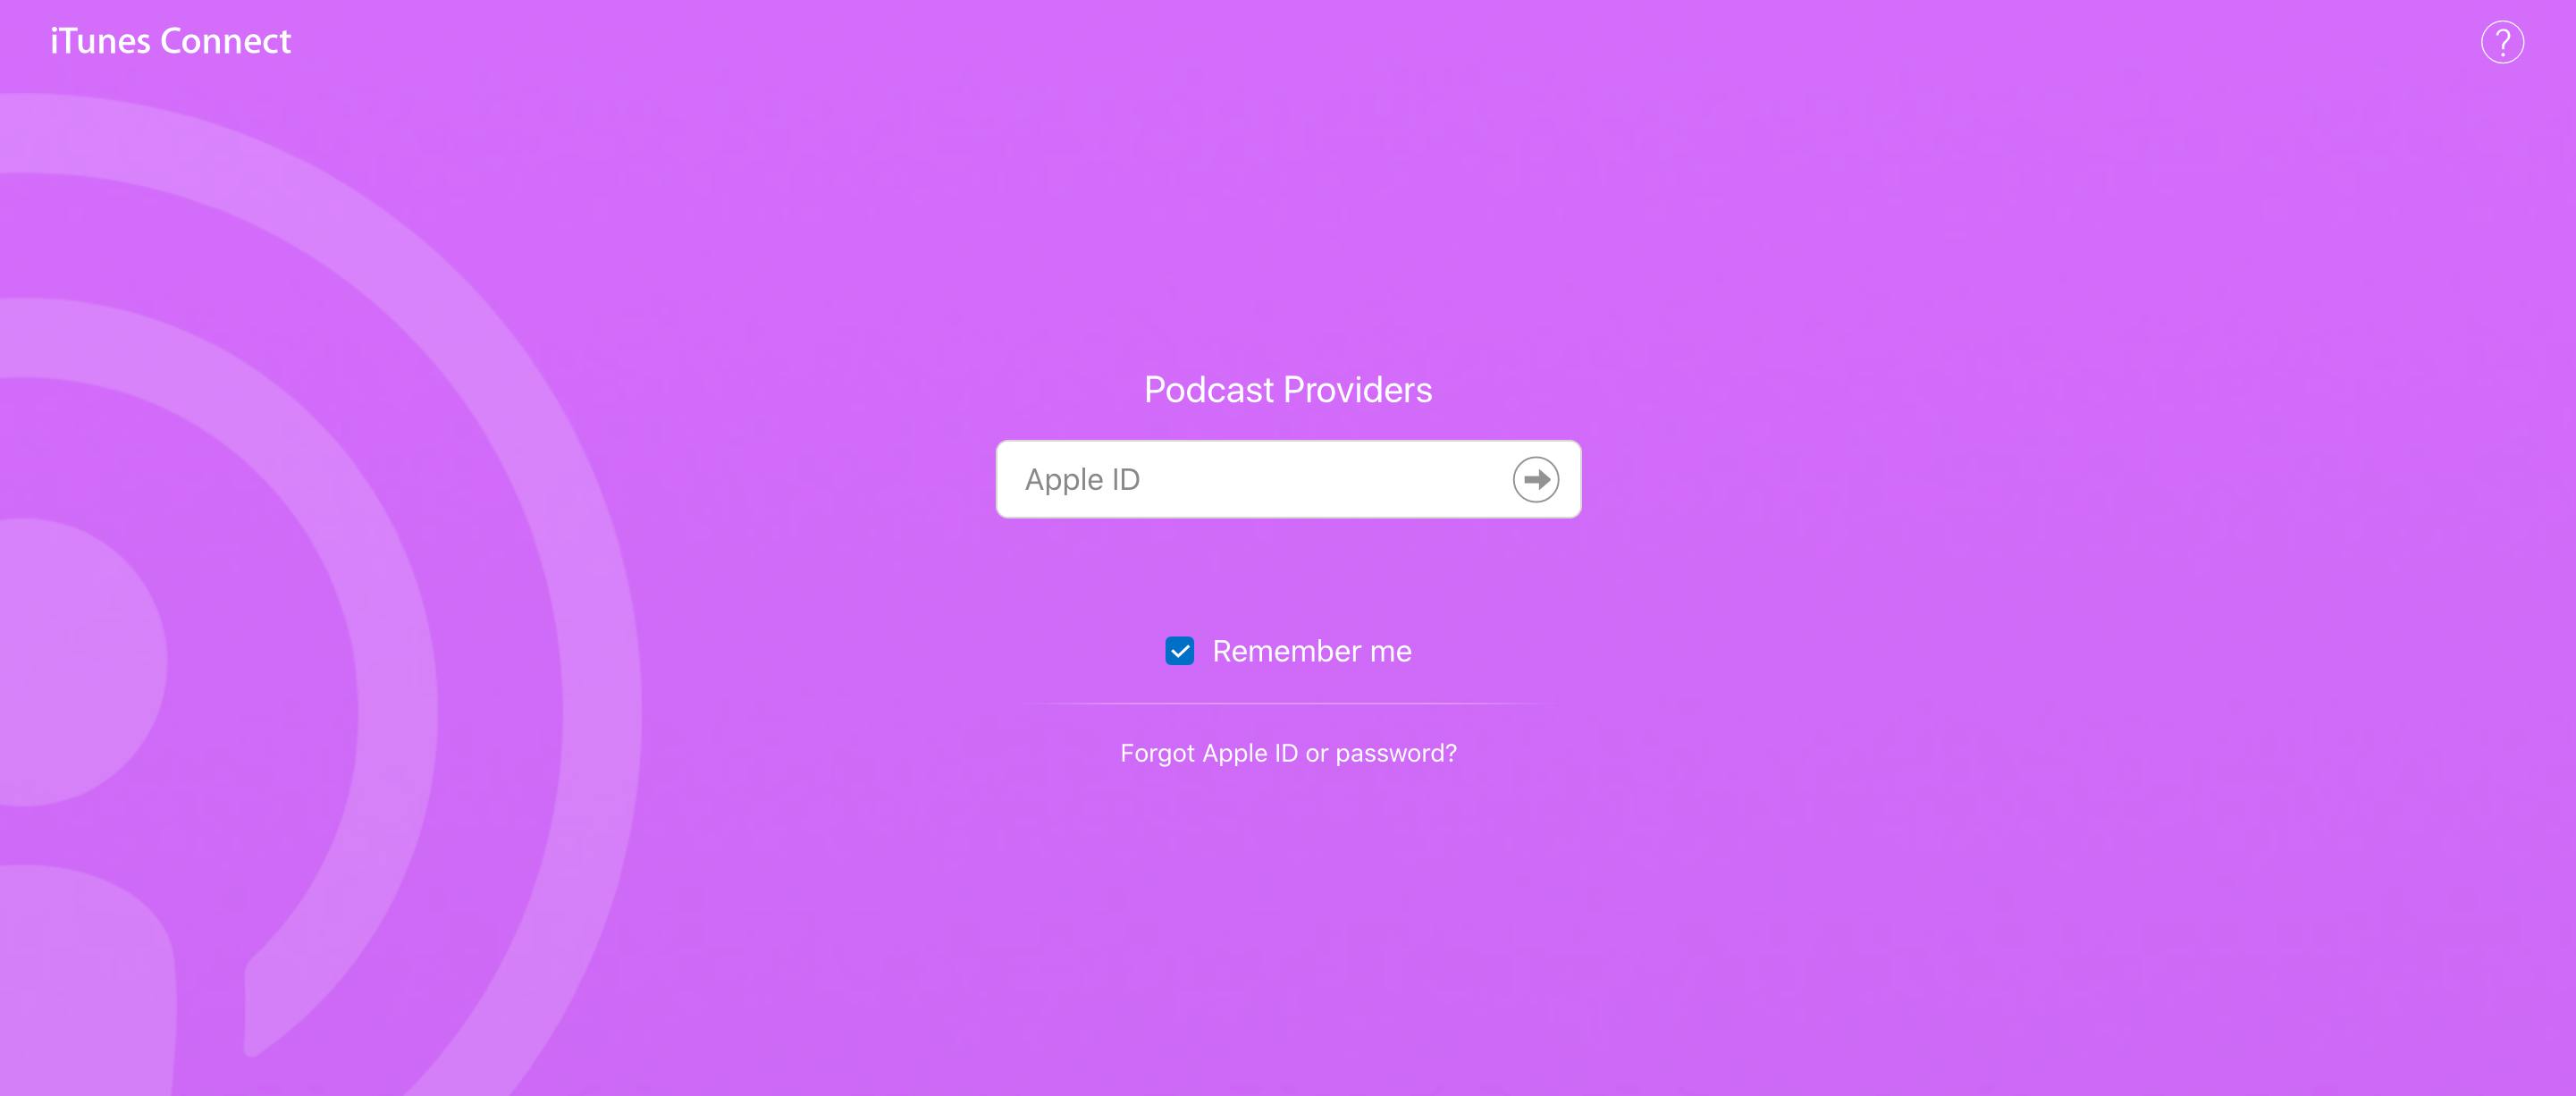 Logging into iTunes Connect for podcast providers